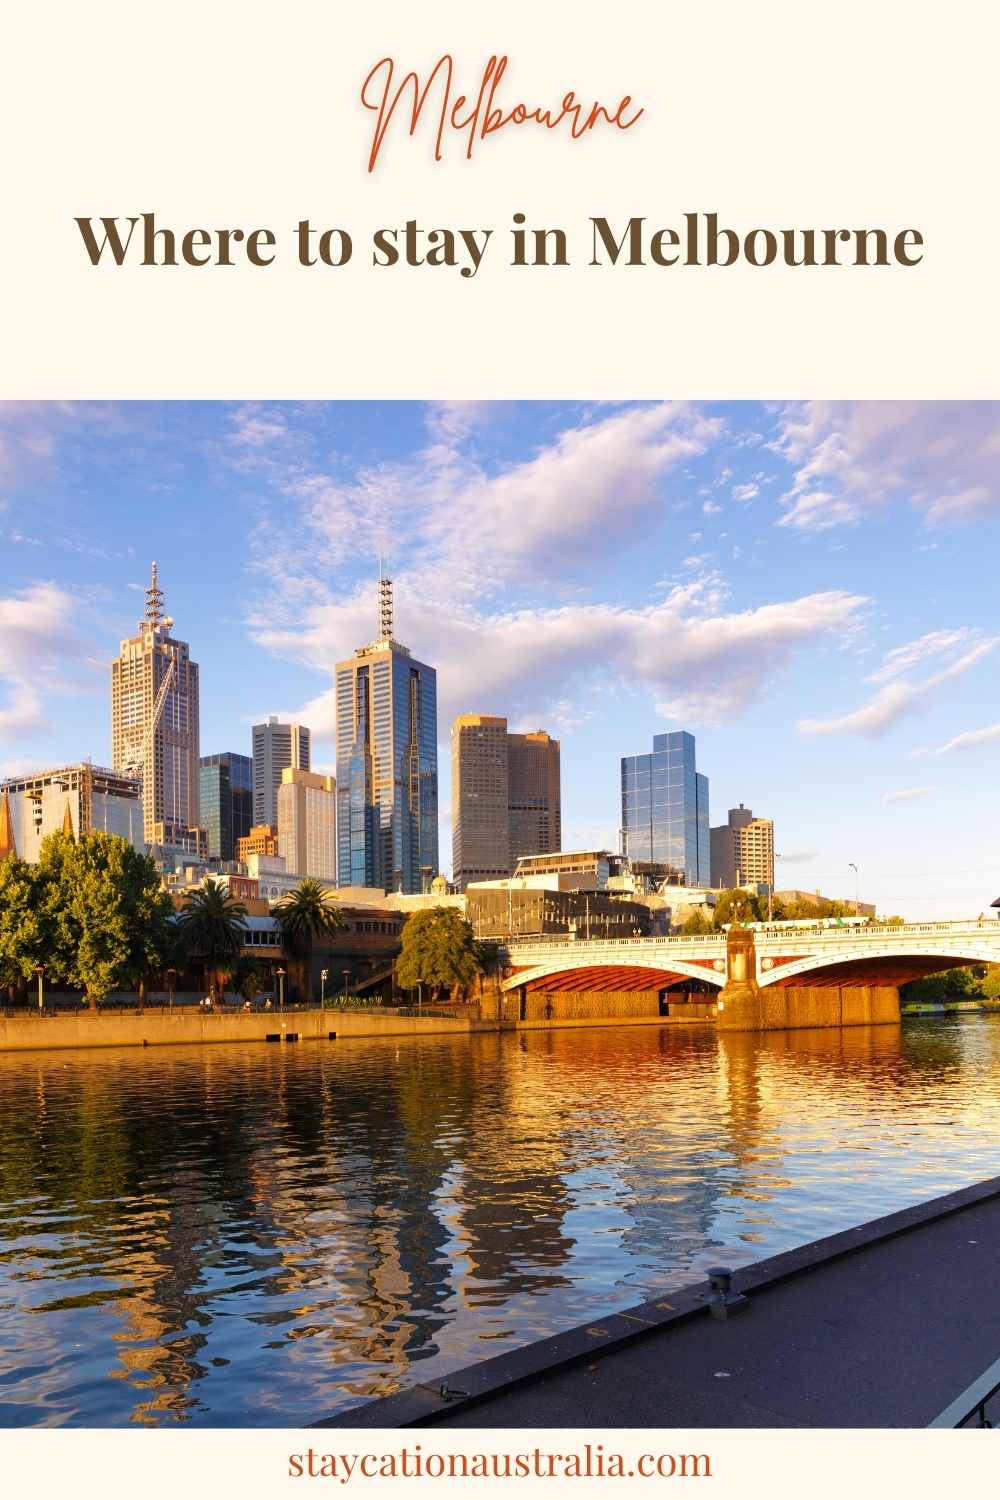 Where to stay in Melbourne